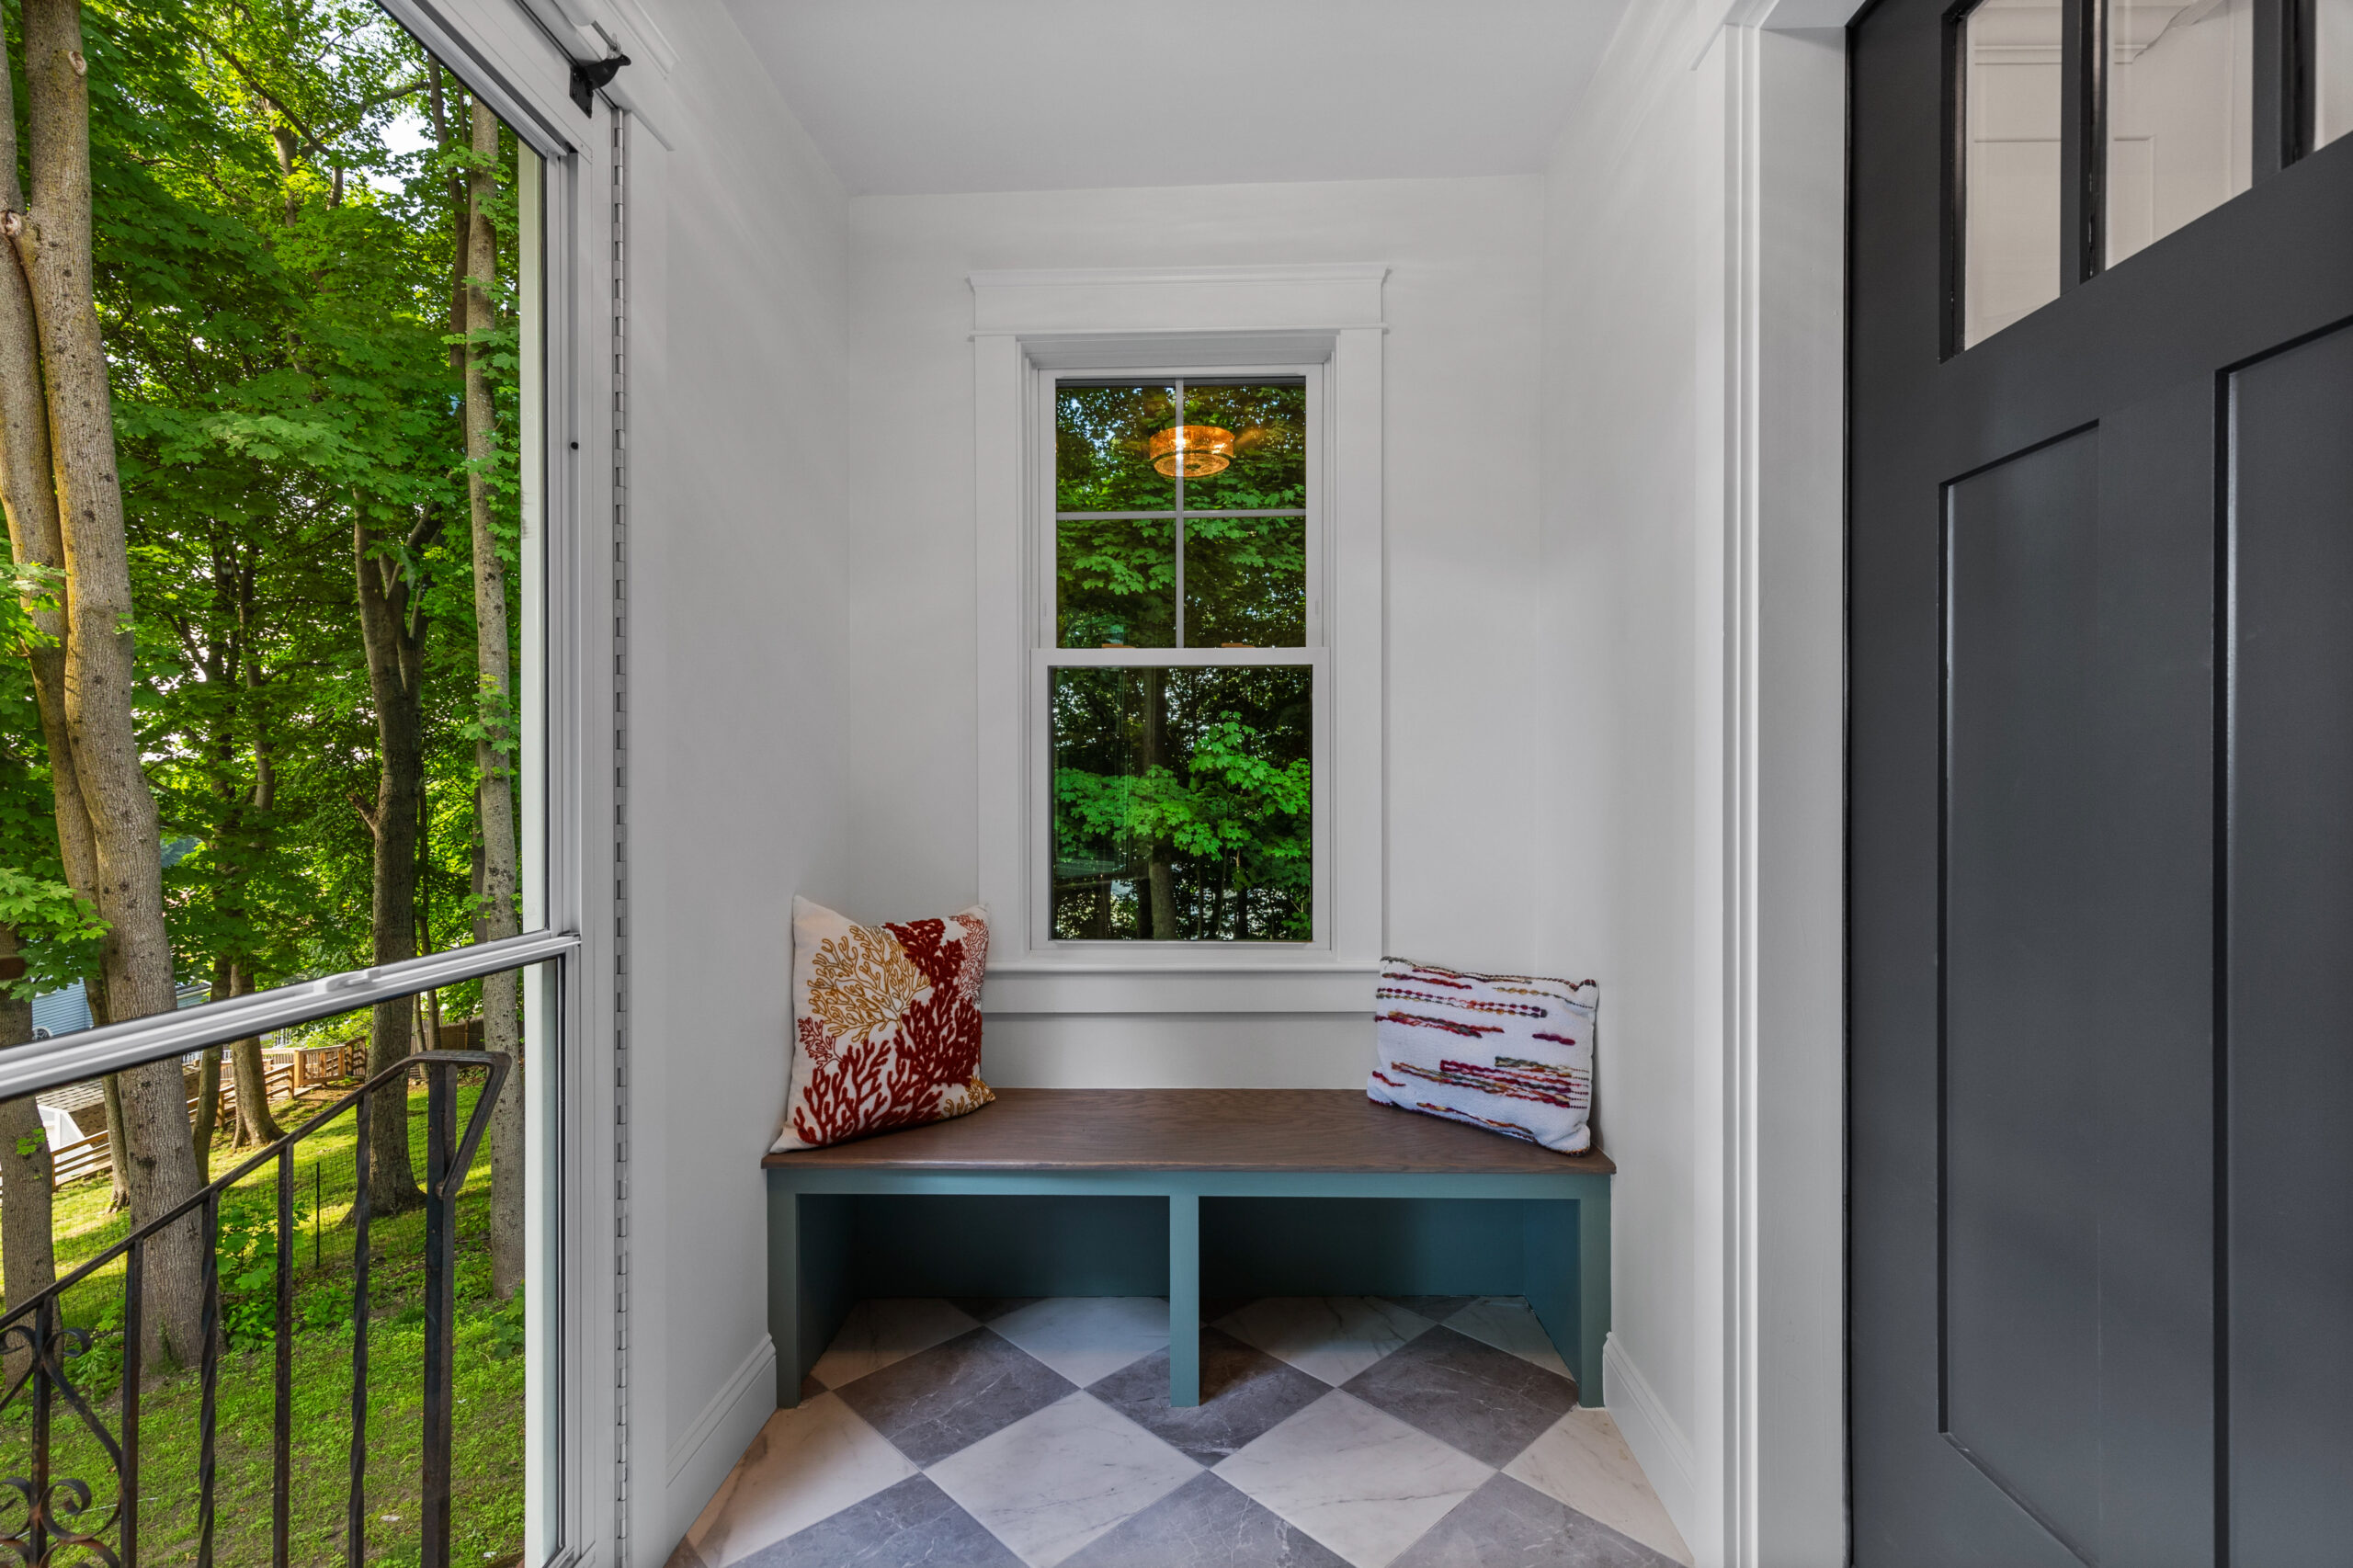 Image of a charming mudroom bench painted in Sherwin Williams Jade Dragon, complemented by a checkerboard marble floor. The bench, adorned with decorative pillows, offers a cozy seating area beneath a large window that provides a scenic view of lush greenery outside. The black door - Benjamin Moore graphite- adds a striking contrast, enhancing the overall aesthetic of this inviting and practical space.